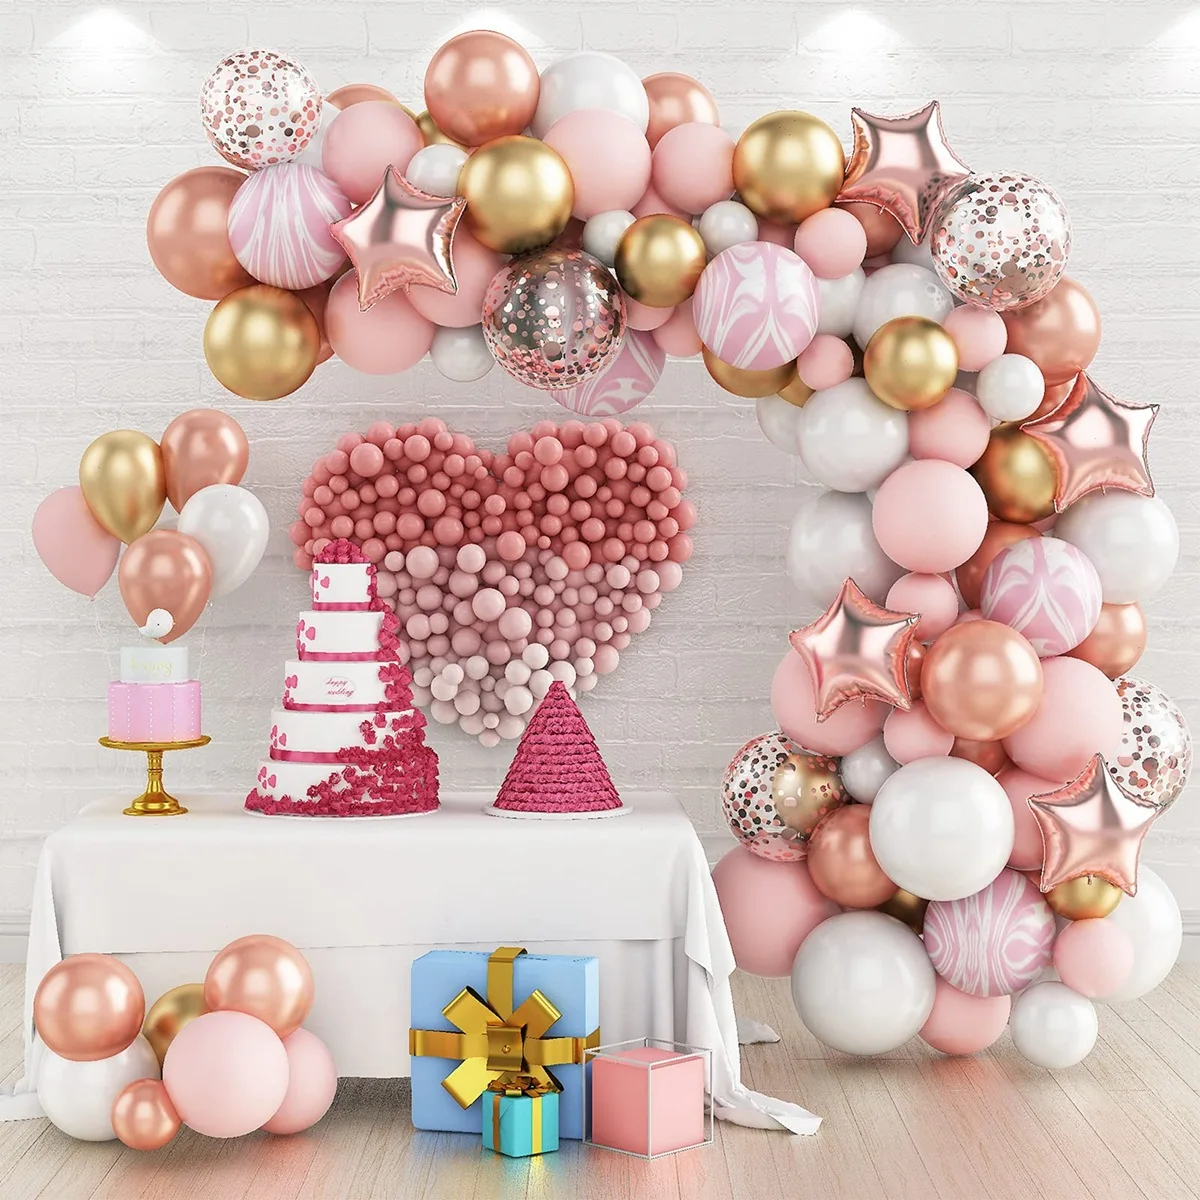 

82pcs Pink Rose Color Party Theme Wedding Latex Bride Birthday Decoration Balloons Arch Set